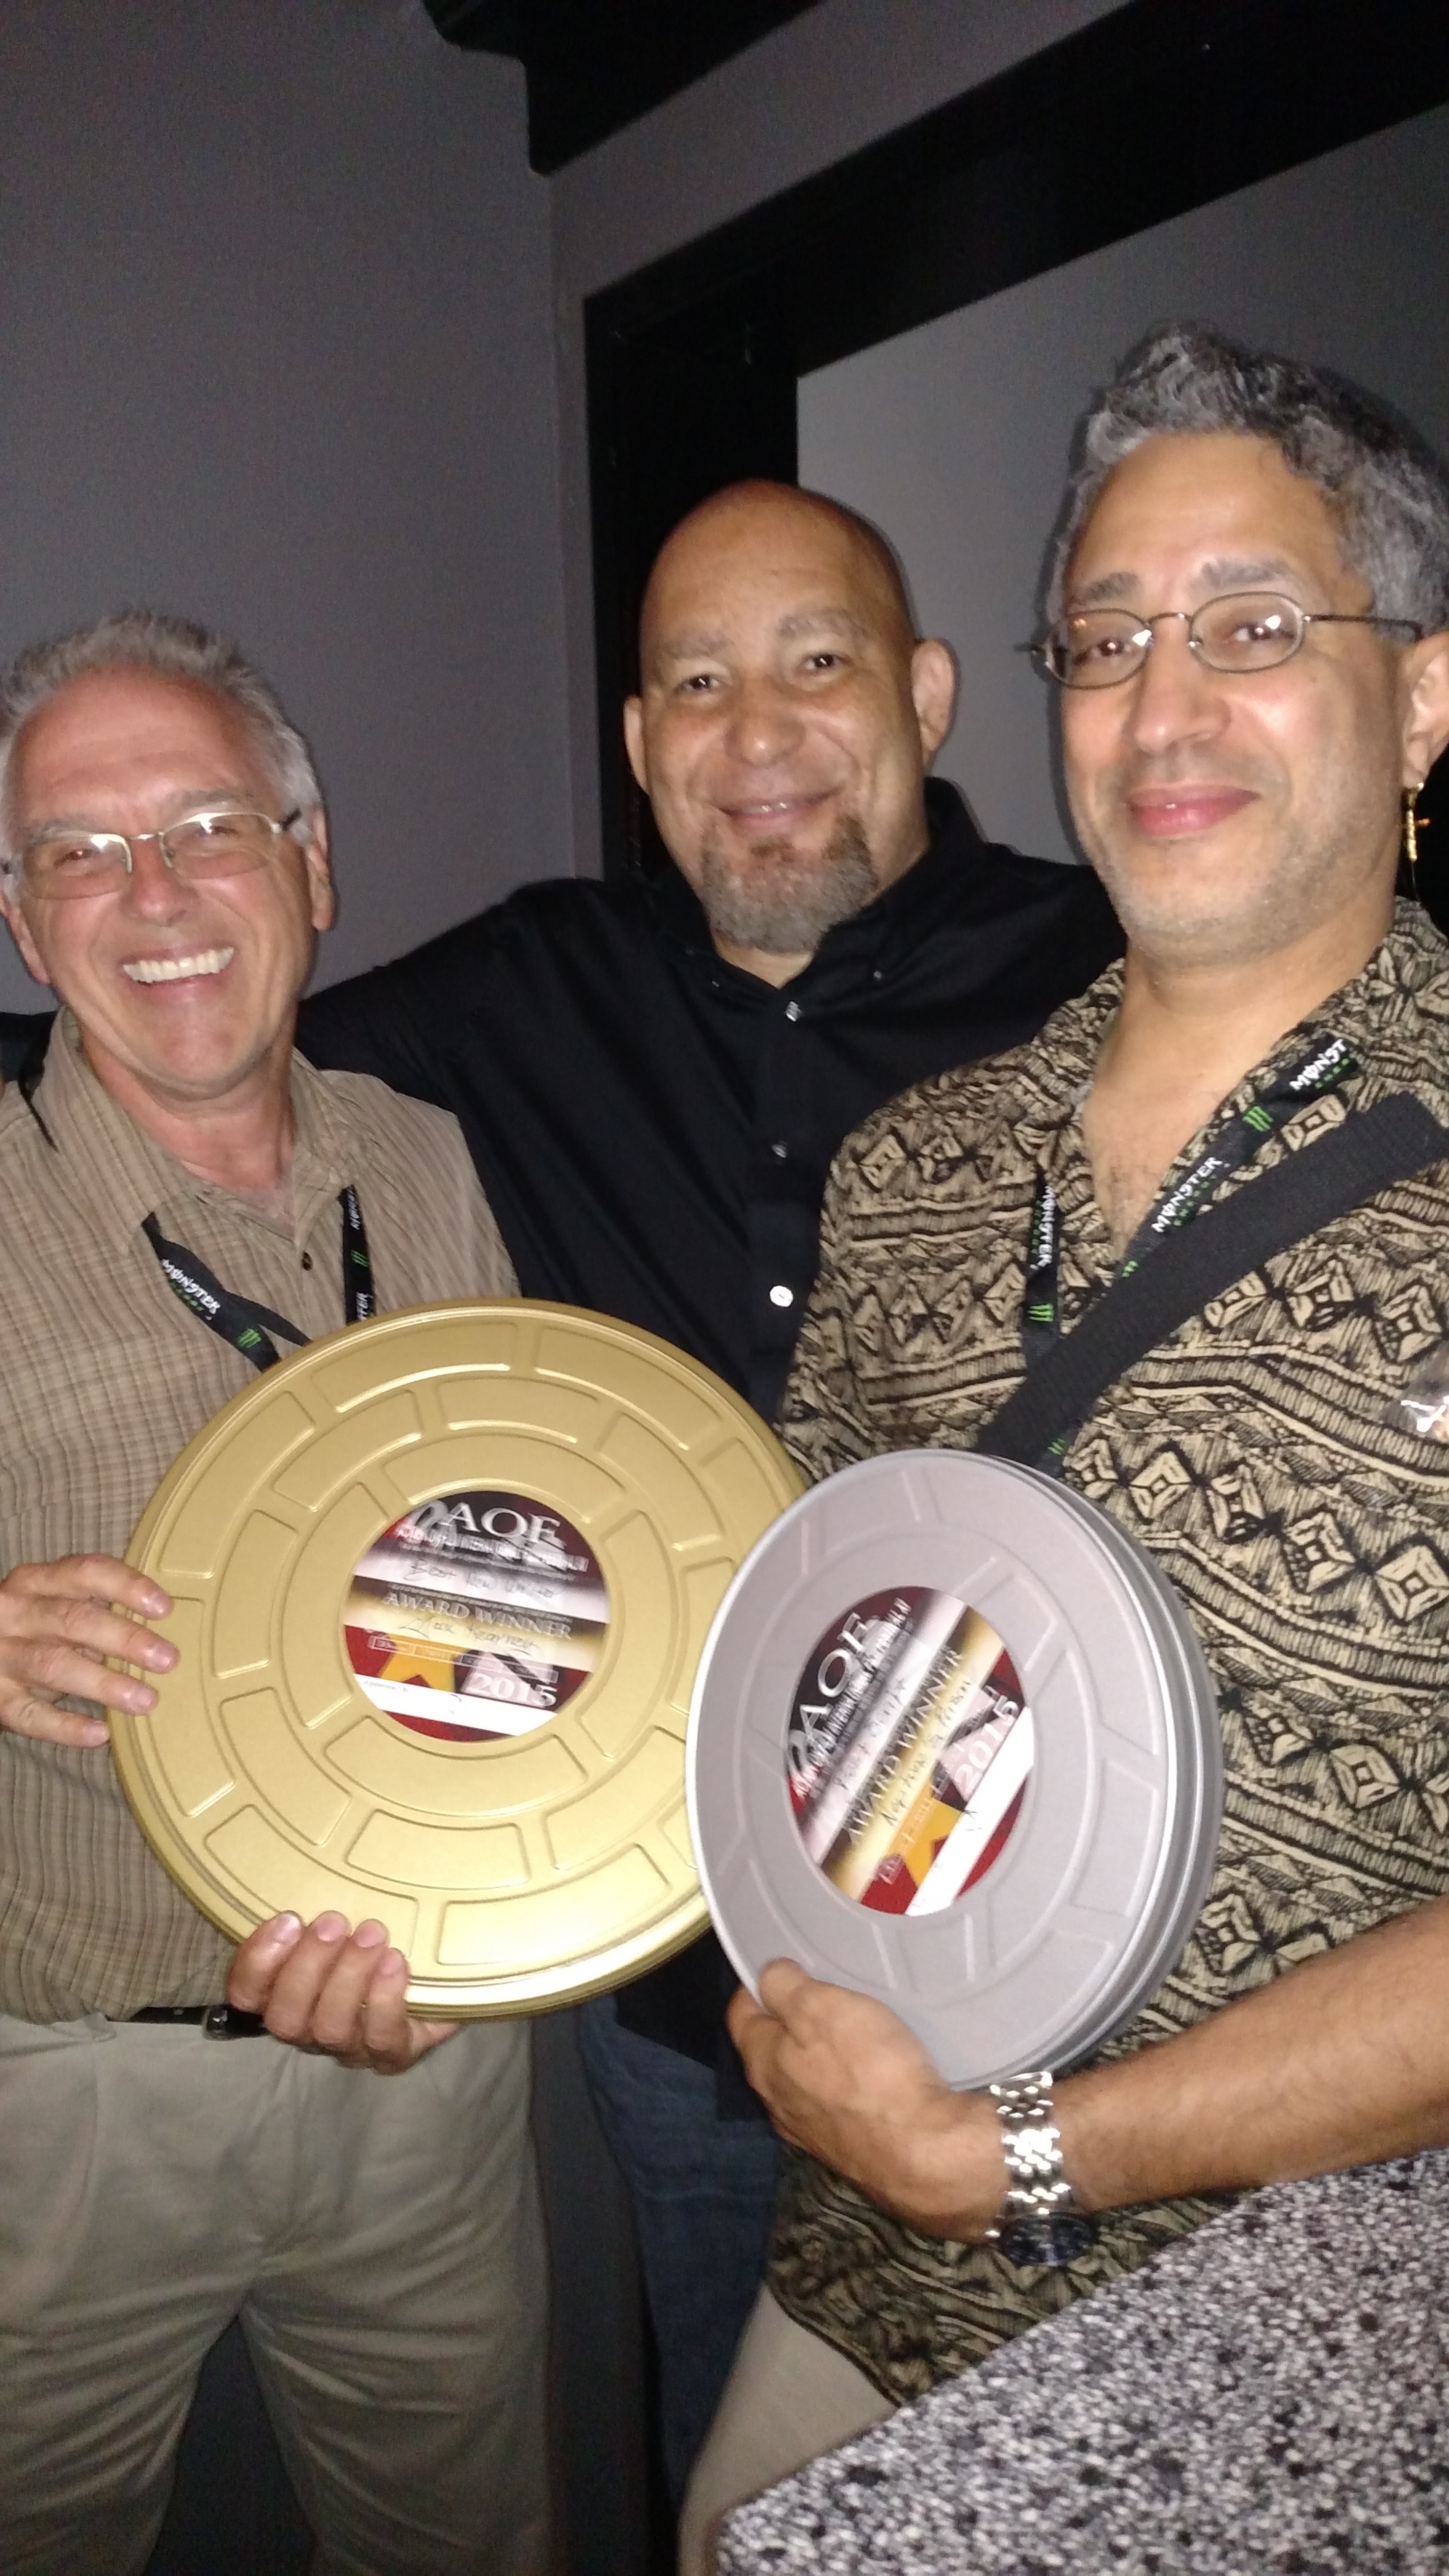 Writer Rob Tobin, Festival Director Del Weston, and Jax Kearney with his awards at the 2015 Action on Film Festival.